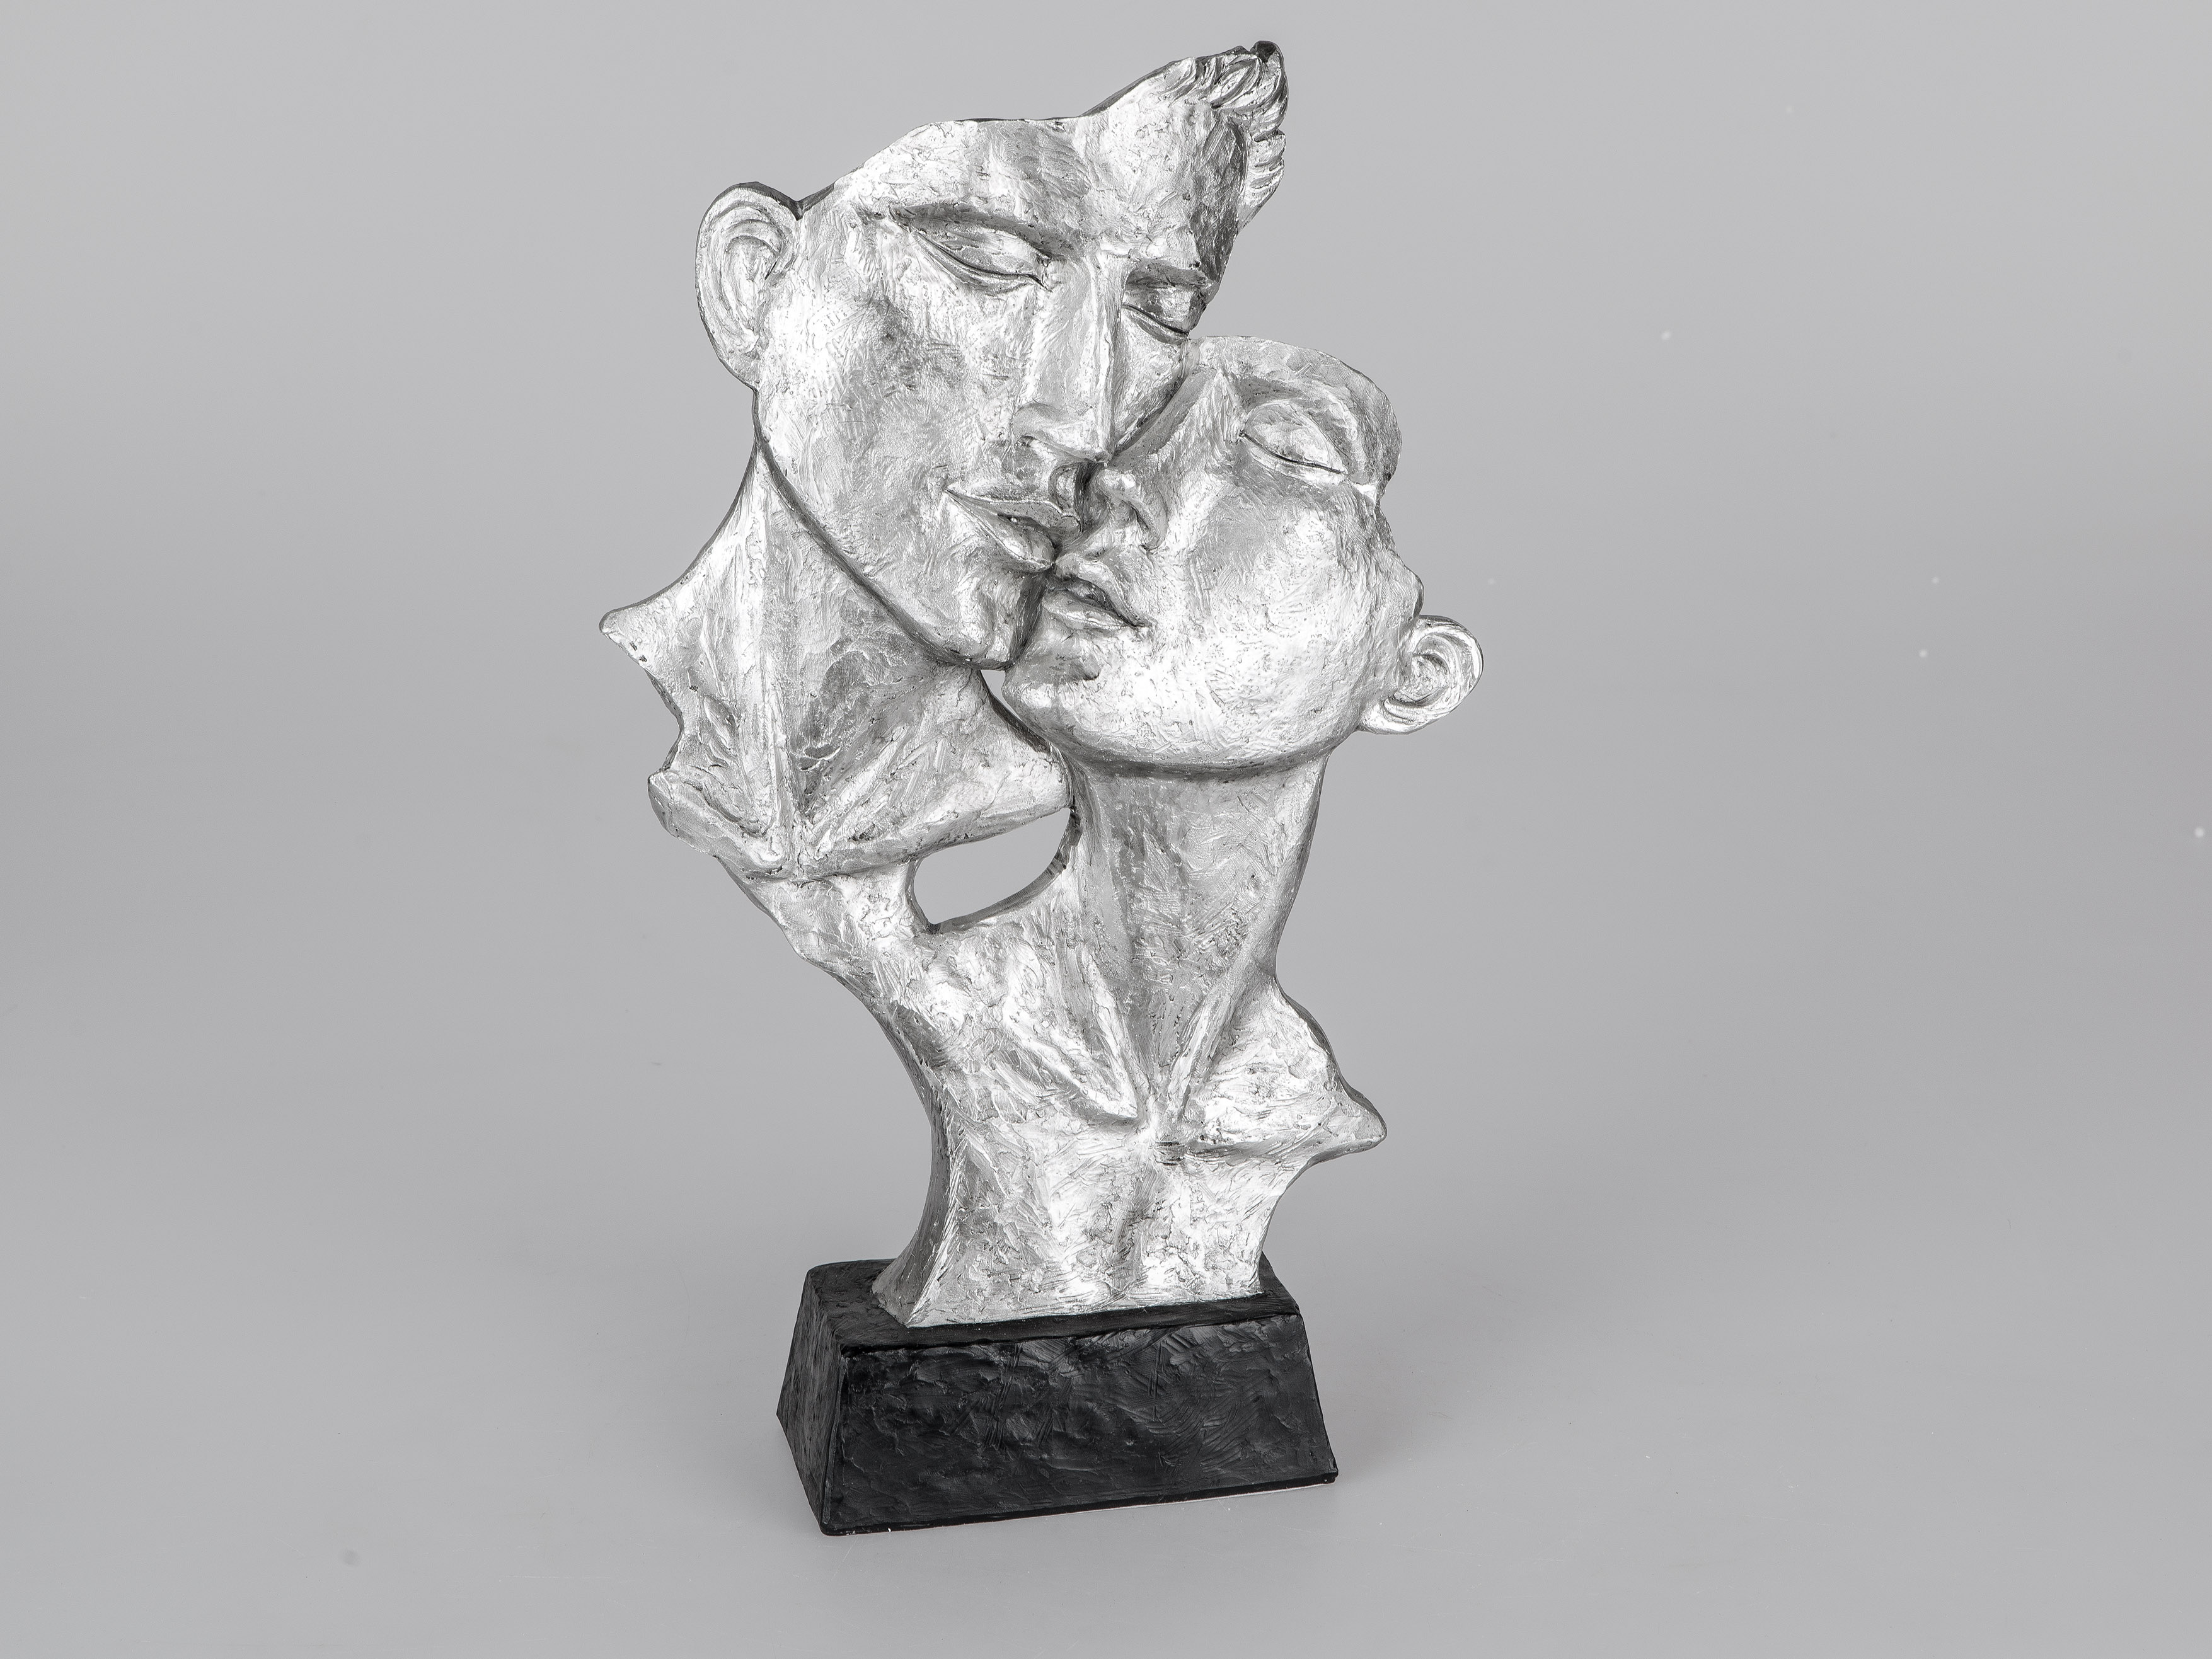 Ceramic Outdoor Fireplace Inspirational Exclusive Decoration Bust Sculpture Couple Kissing Ceramic In Black Silver Height 40 Cm